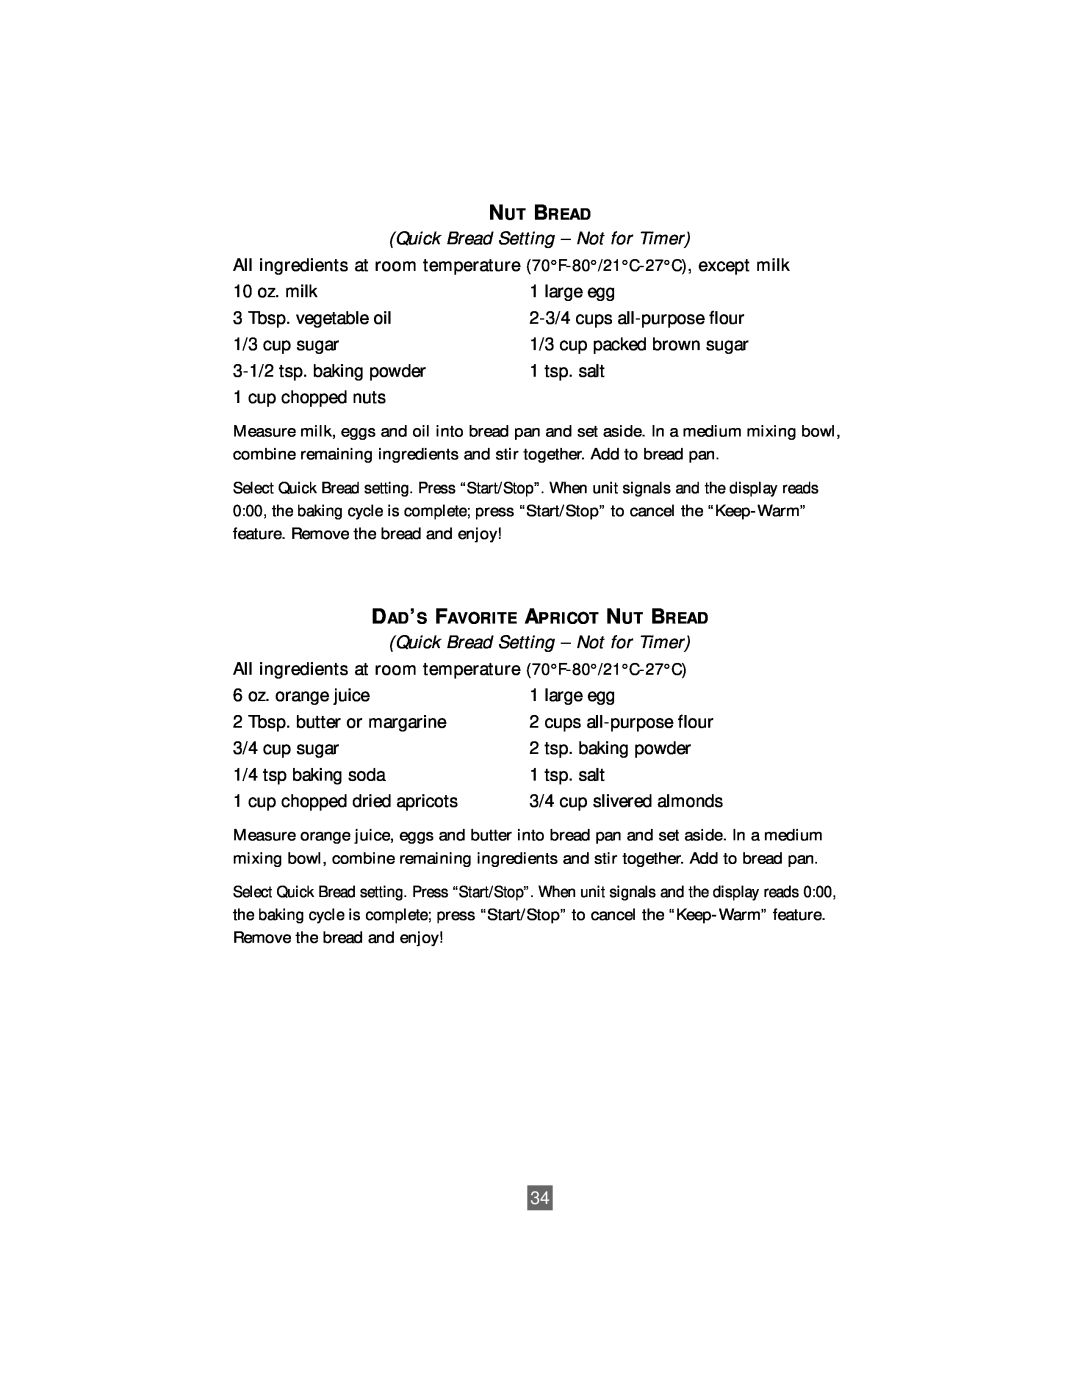 Oster P. N. 101017 manual Quick Bread Setting - Not for Timer, Dad’S Favorite Apricot Nut Bread 